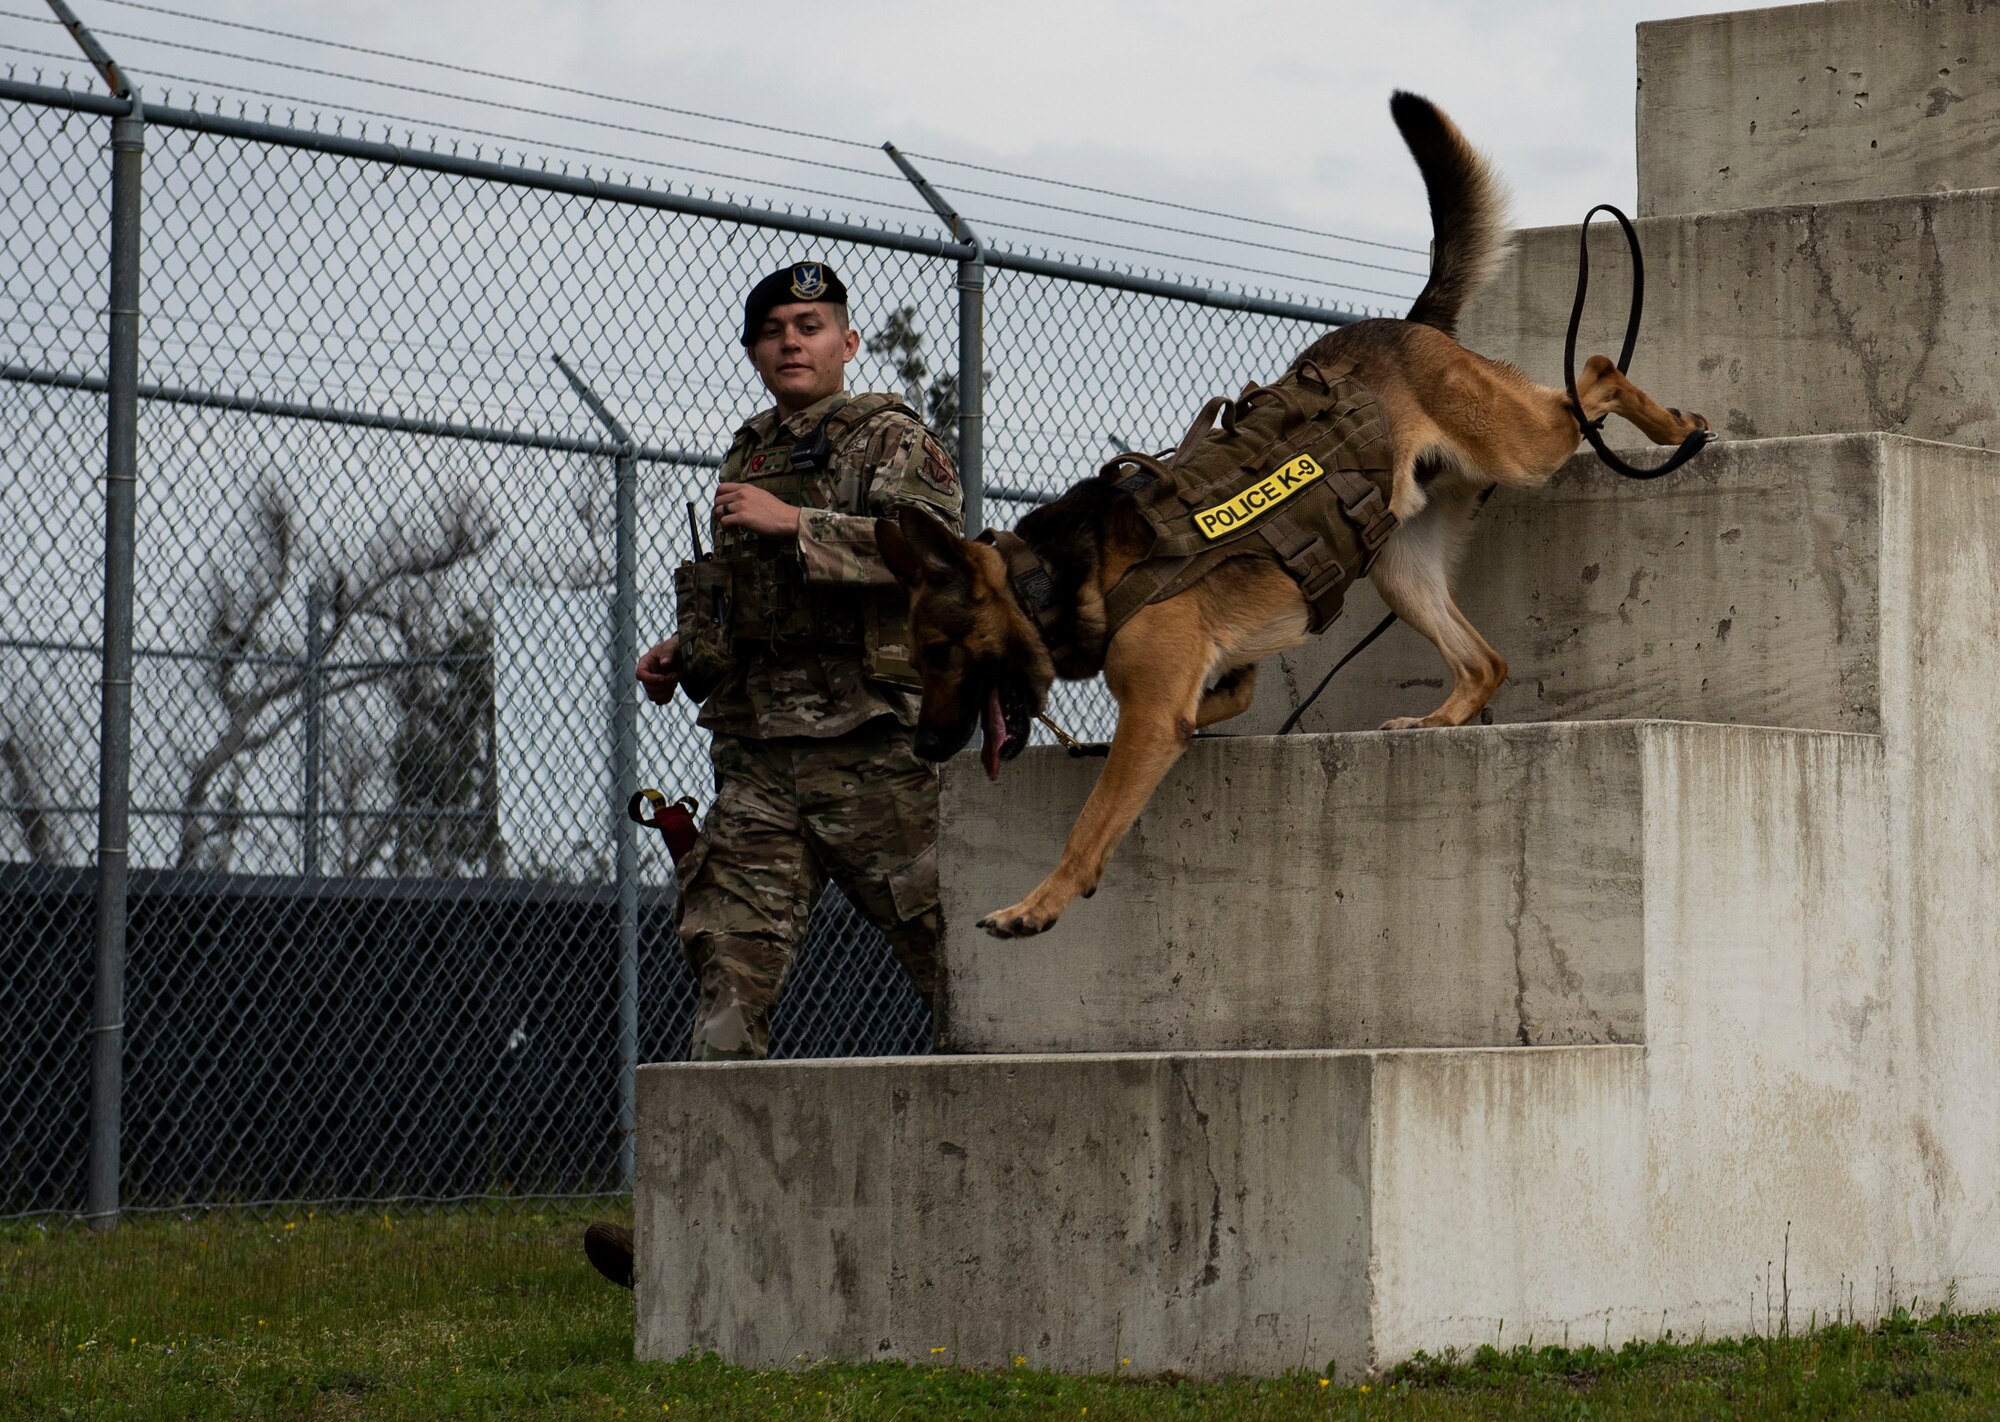 Sunny, a 325th Security Forces Squadron military working dog, and his handler, Staff Sgt. Jason Vogt, run through an obstacle course used for cardio training at Tyndall Air Force Base, Florida, March 3, 2020. Cardio workouts and training techniques are part of the daily routine for MWD duos. This photo was taken while doing a demonstration for K-9 Veterans Day. (U.S. Air Force photo by Staff Sgt. Magen M. Reeves)